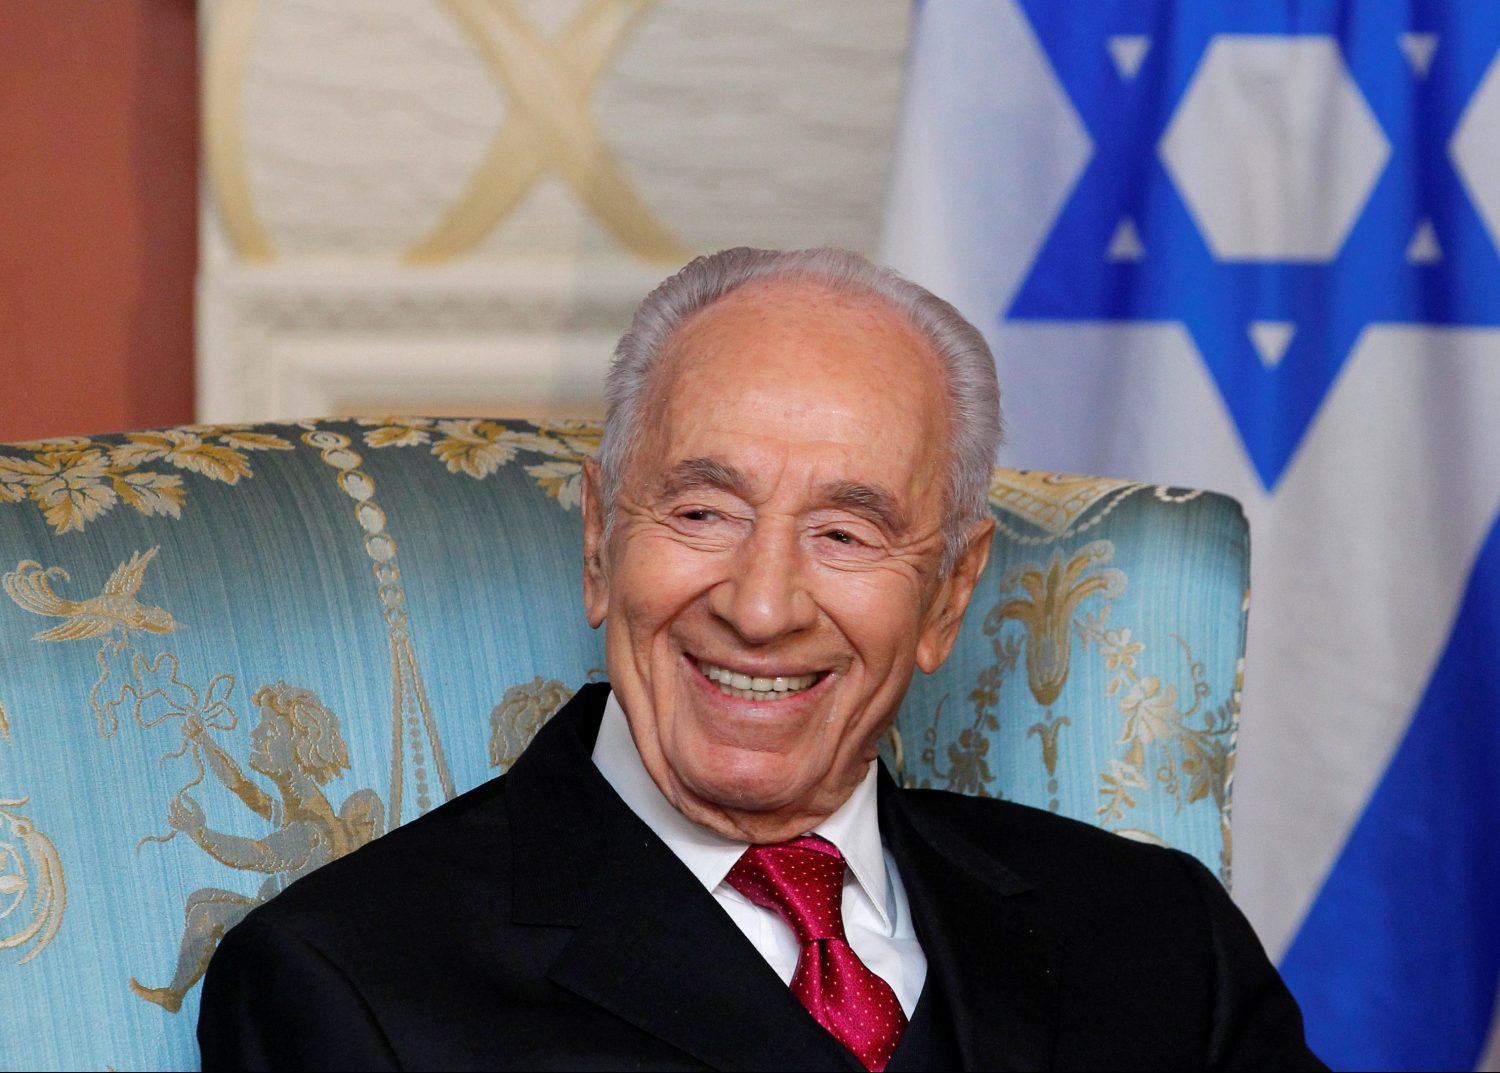 Israel's President Shimon Peres takes part in a meeting with Governor General David Johnston (not pictured) at Rideau Hall in Ottawa in this May 7, 2012 file photo. REUTERS/Blair Gable/Files TPX IMAGES OF THE DAY - RTSPRLM